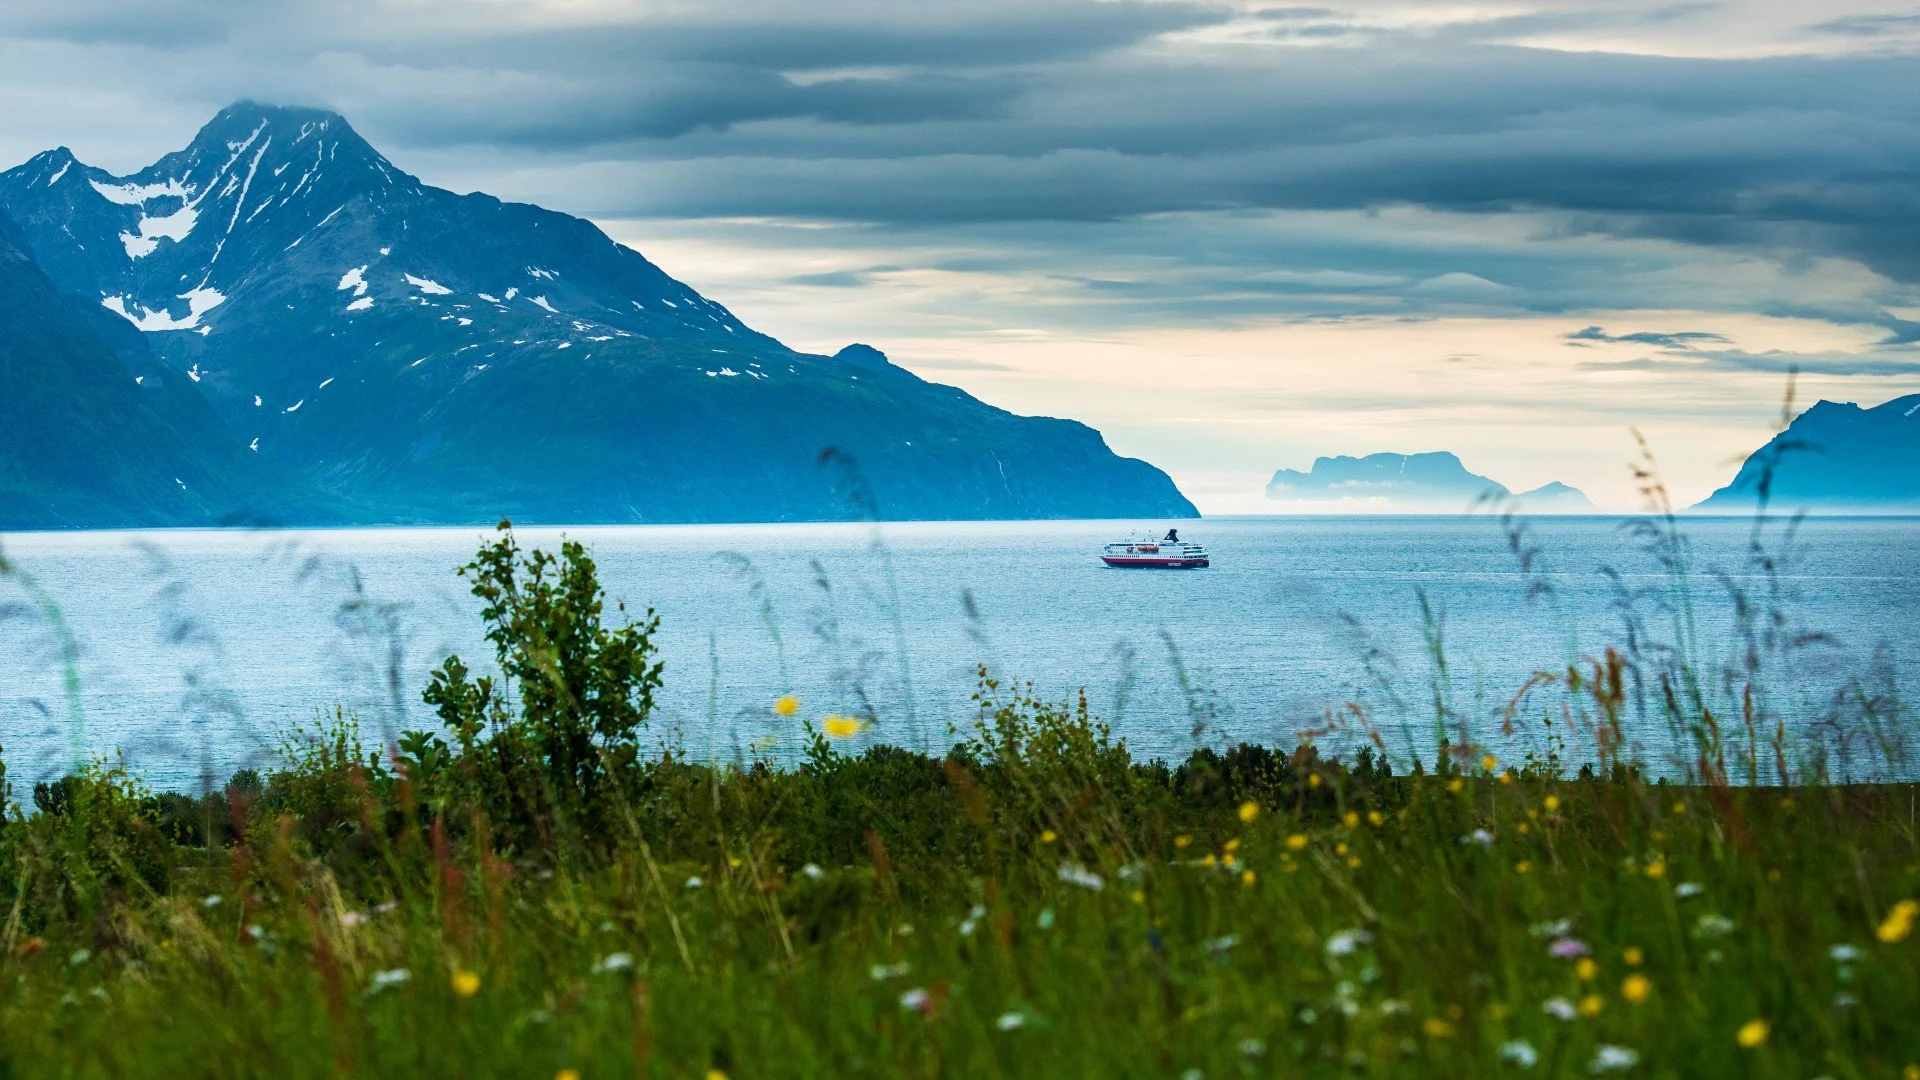 MS Nordnorge is sailing through Lyngenfjord, a mountain range in the Nothern Norway.